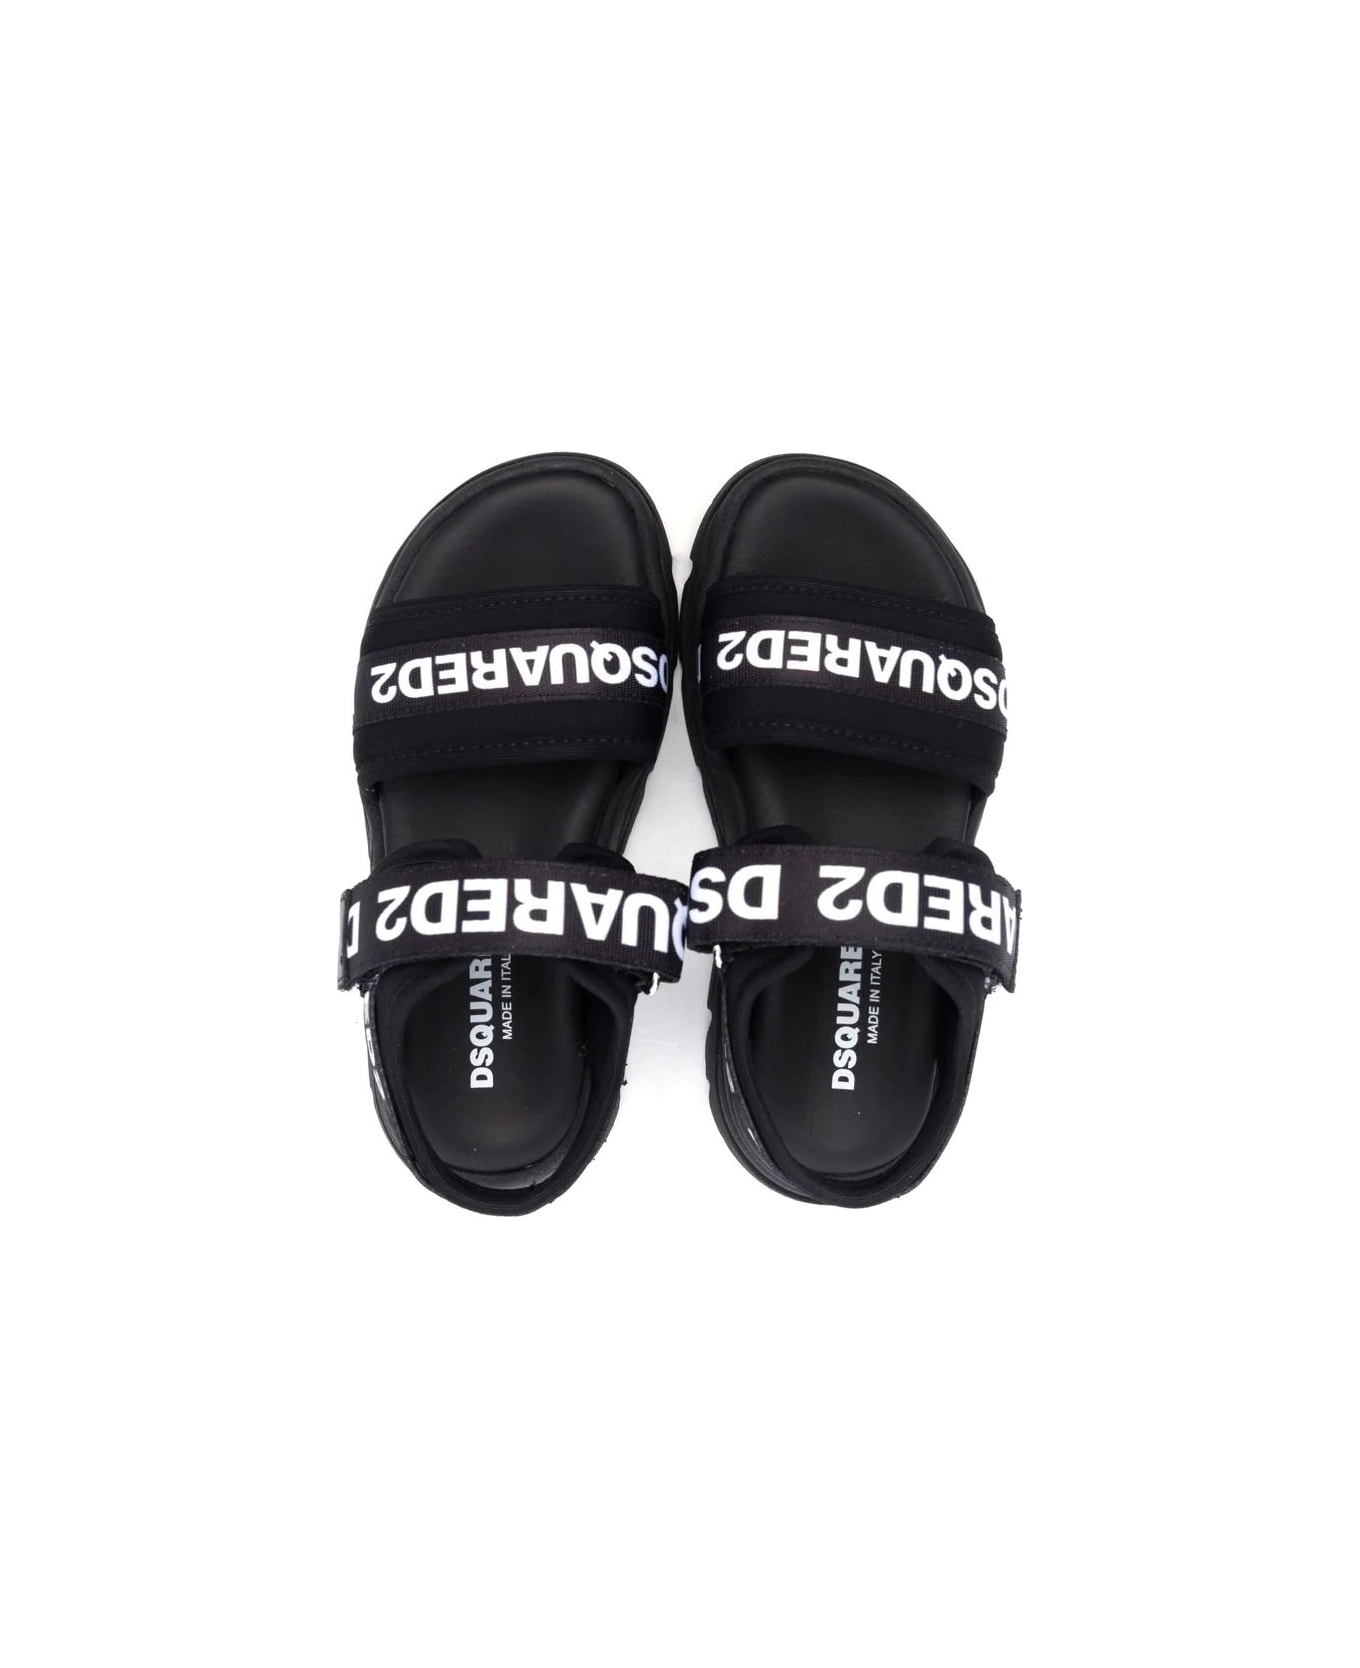 Dsquared2 Sandals With Print - Black